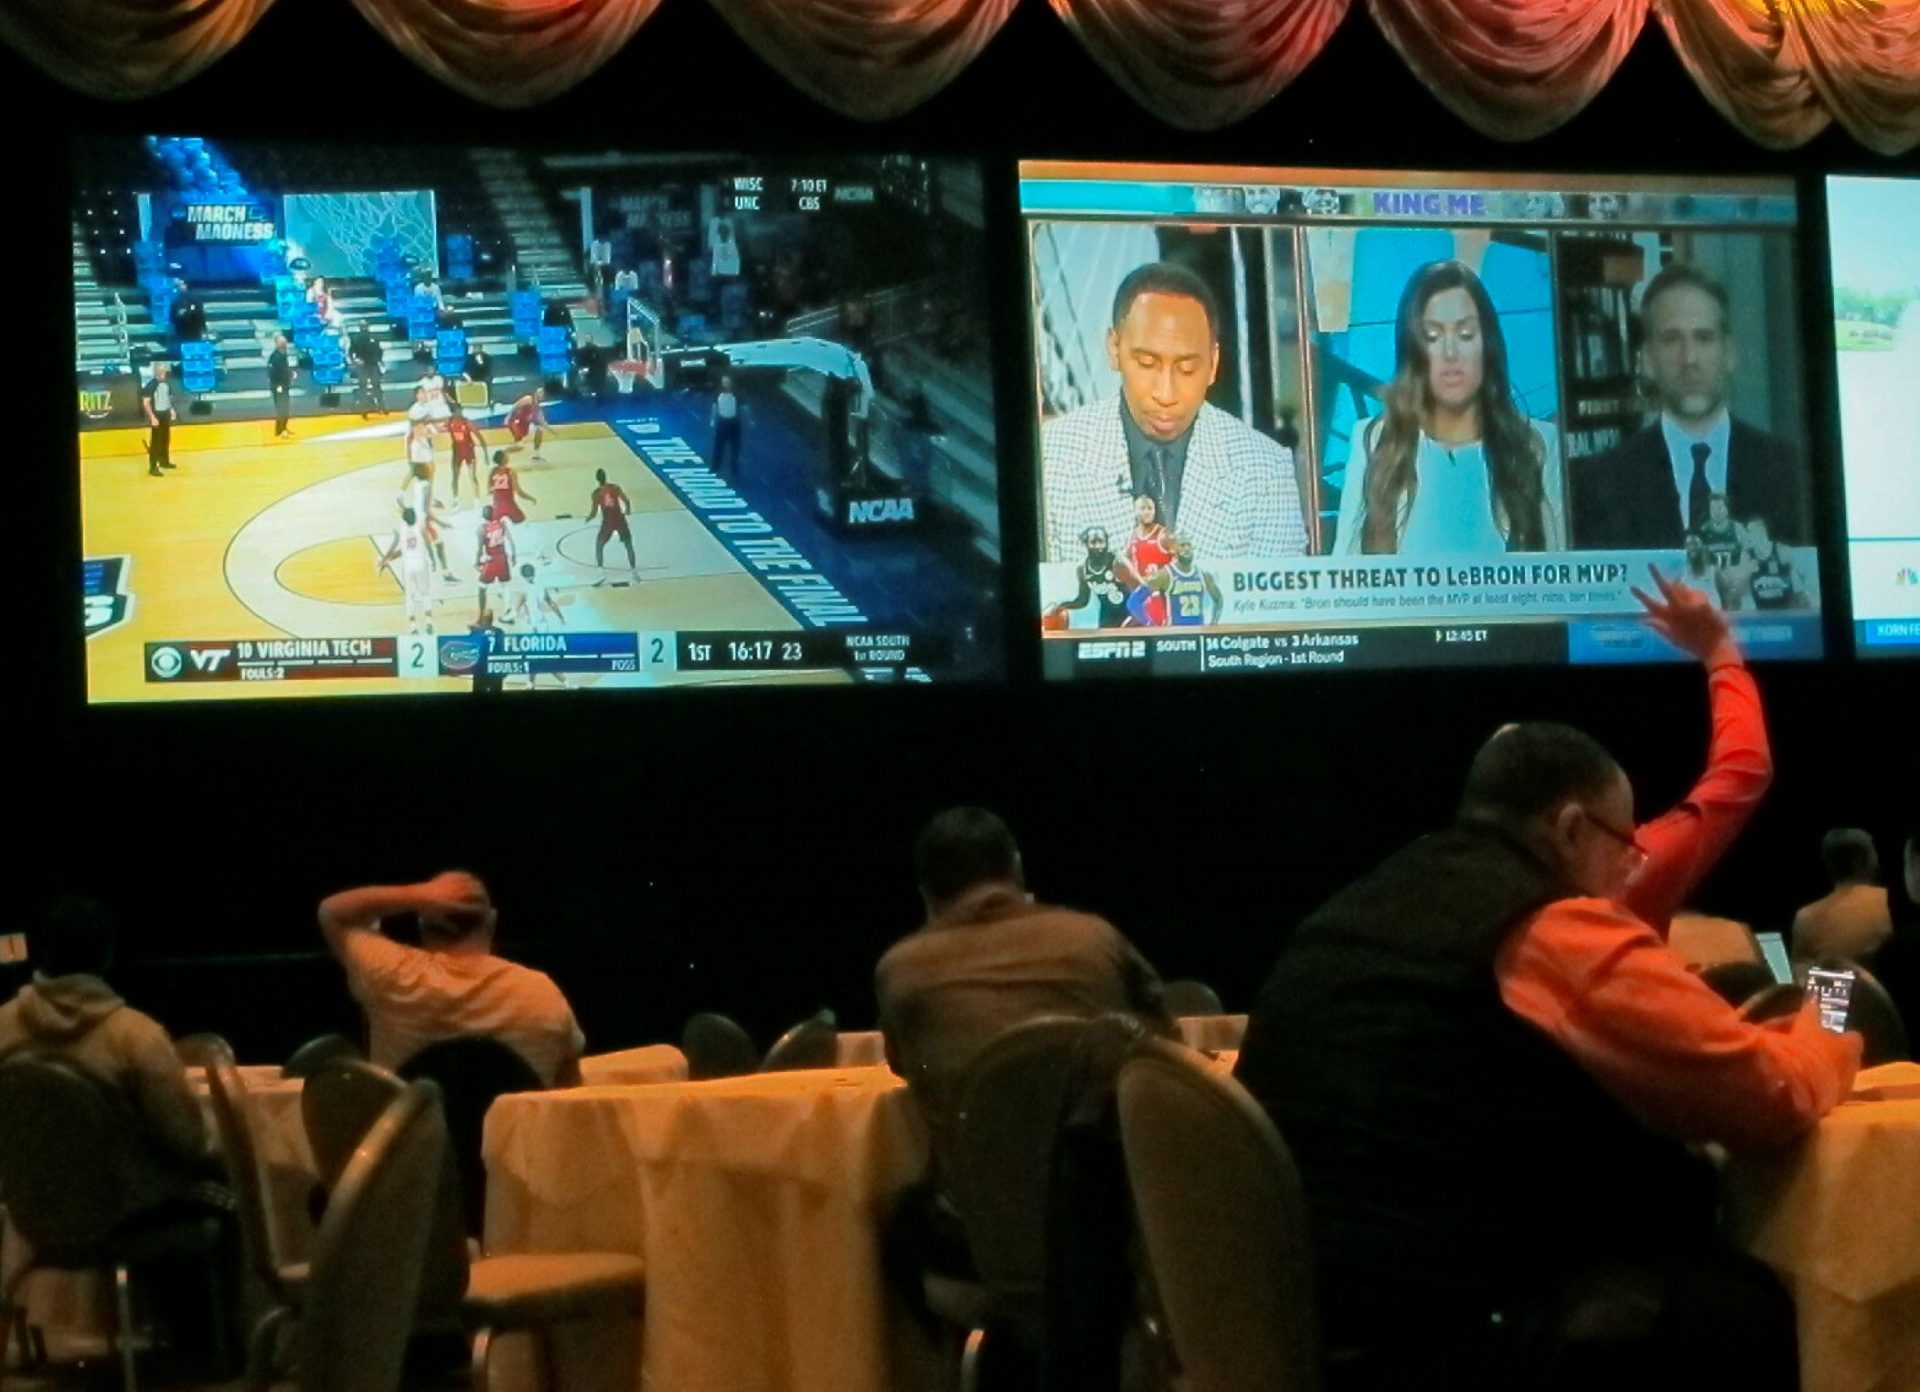 Customers watch a game in the NCAA basketball March Madness tournament on Friday March 19, 2021 at the Borgata casino in Atlantic City NJ. Last year, it was March sadness as the NCAA college basketball tournament got canceled days before it was supposed to start, due to the coronavirus.